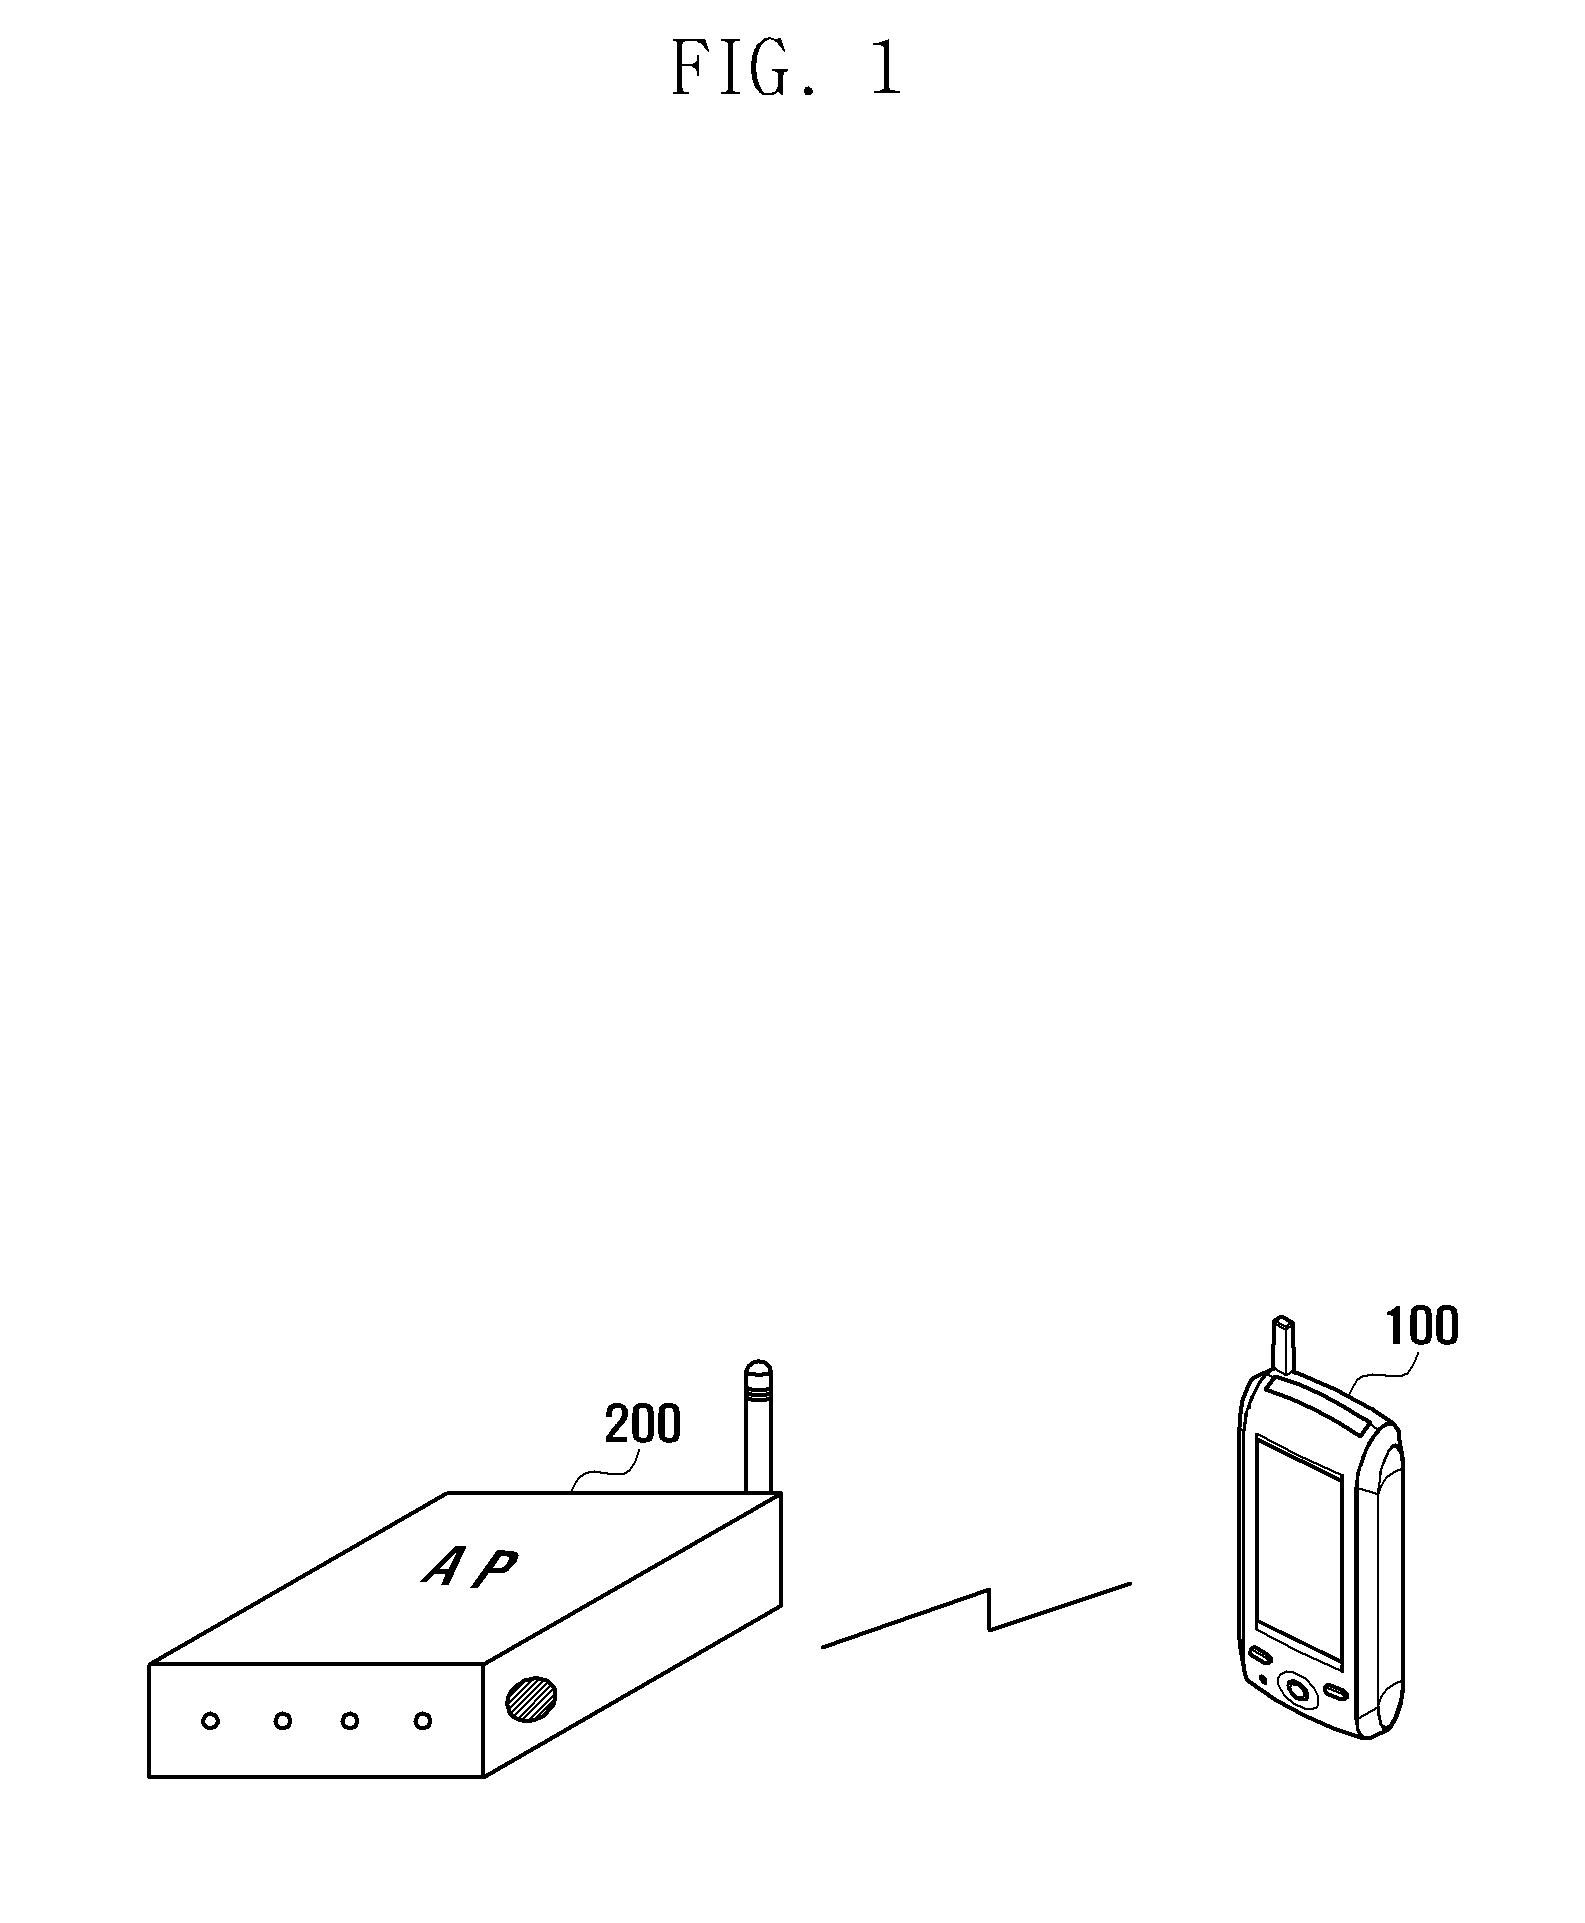 Security operation method and system for access point